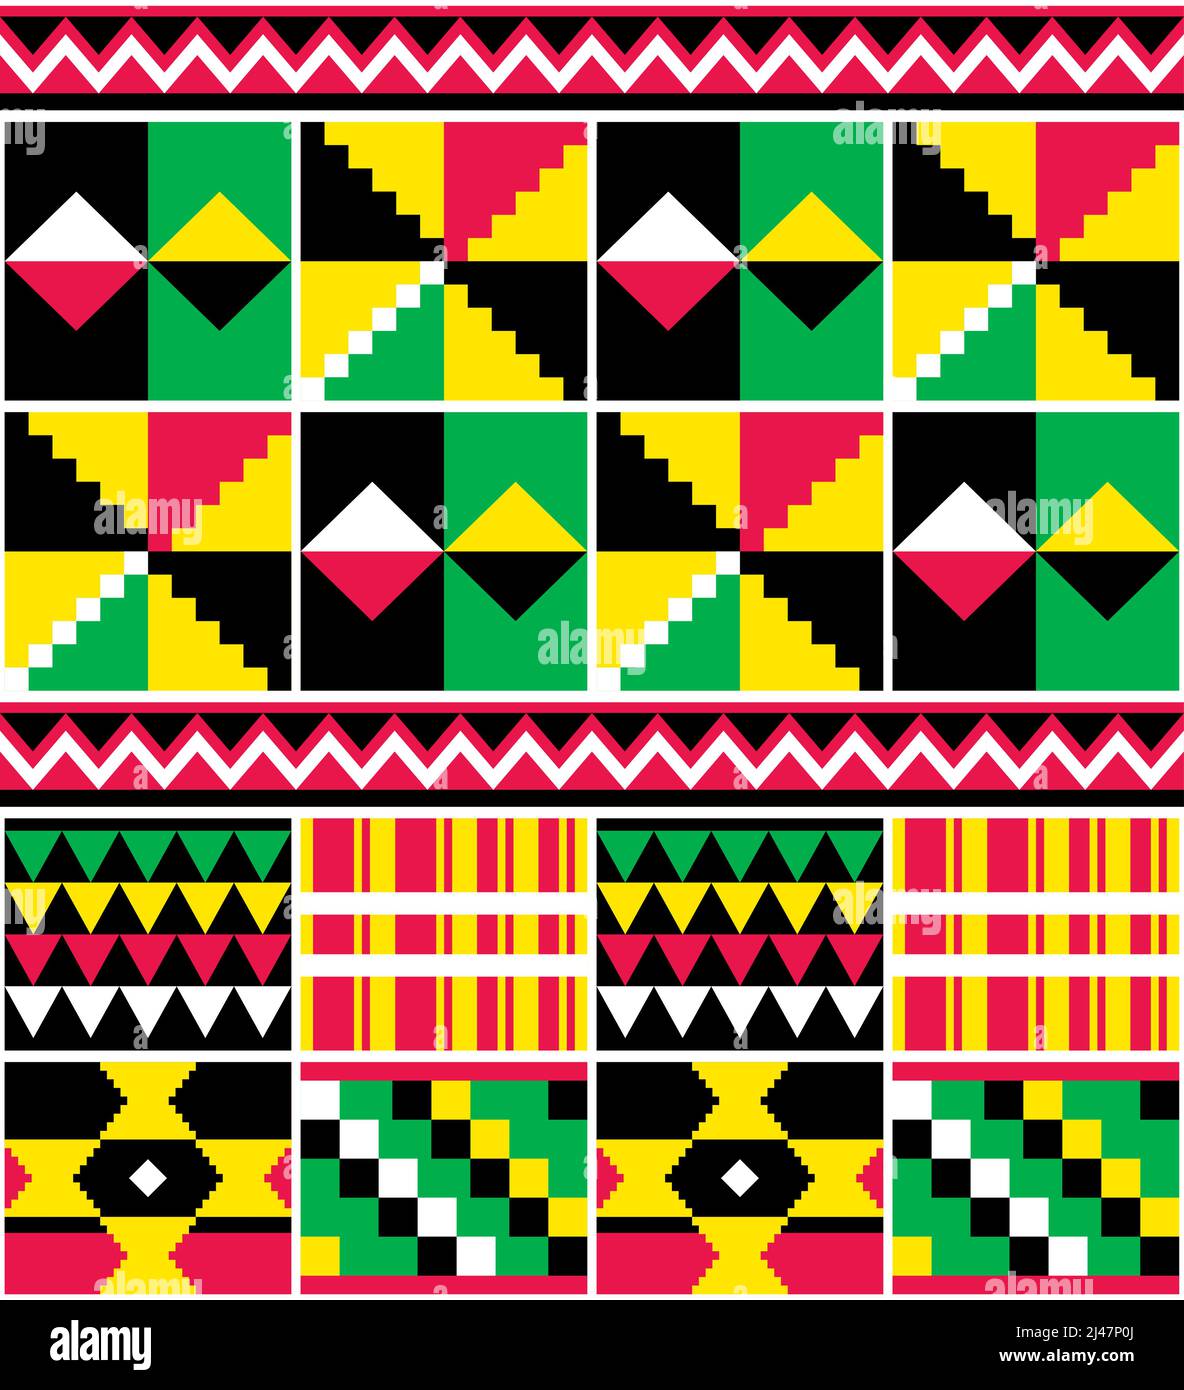 Kente nwentoma geometric vector seamless pattern in green, red and yellow inspired by African tribal fabrics or textiles from Ghana Stock Vector